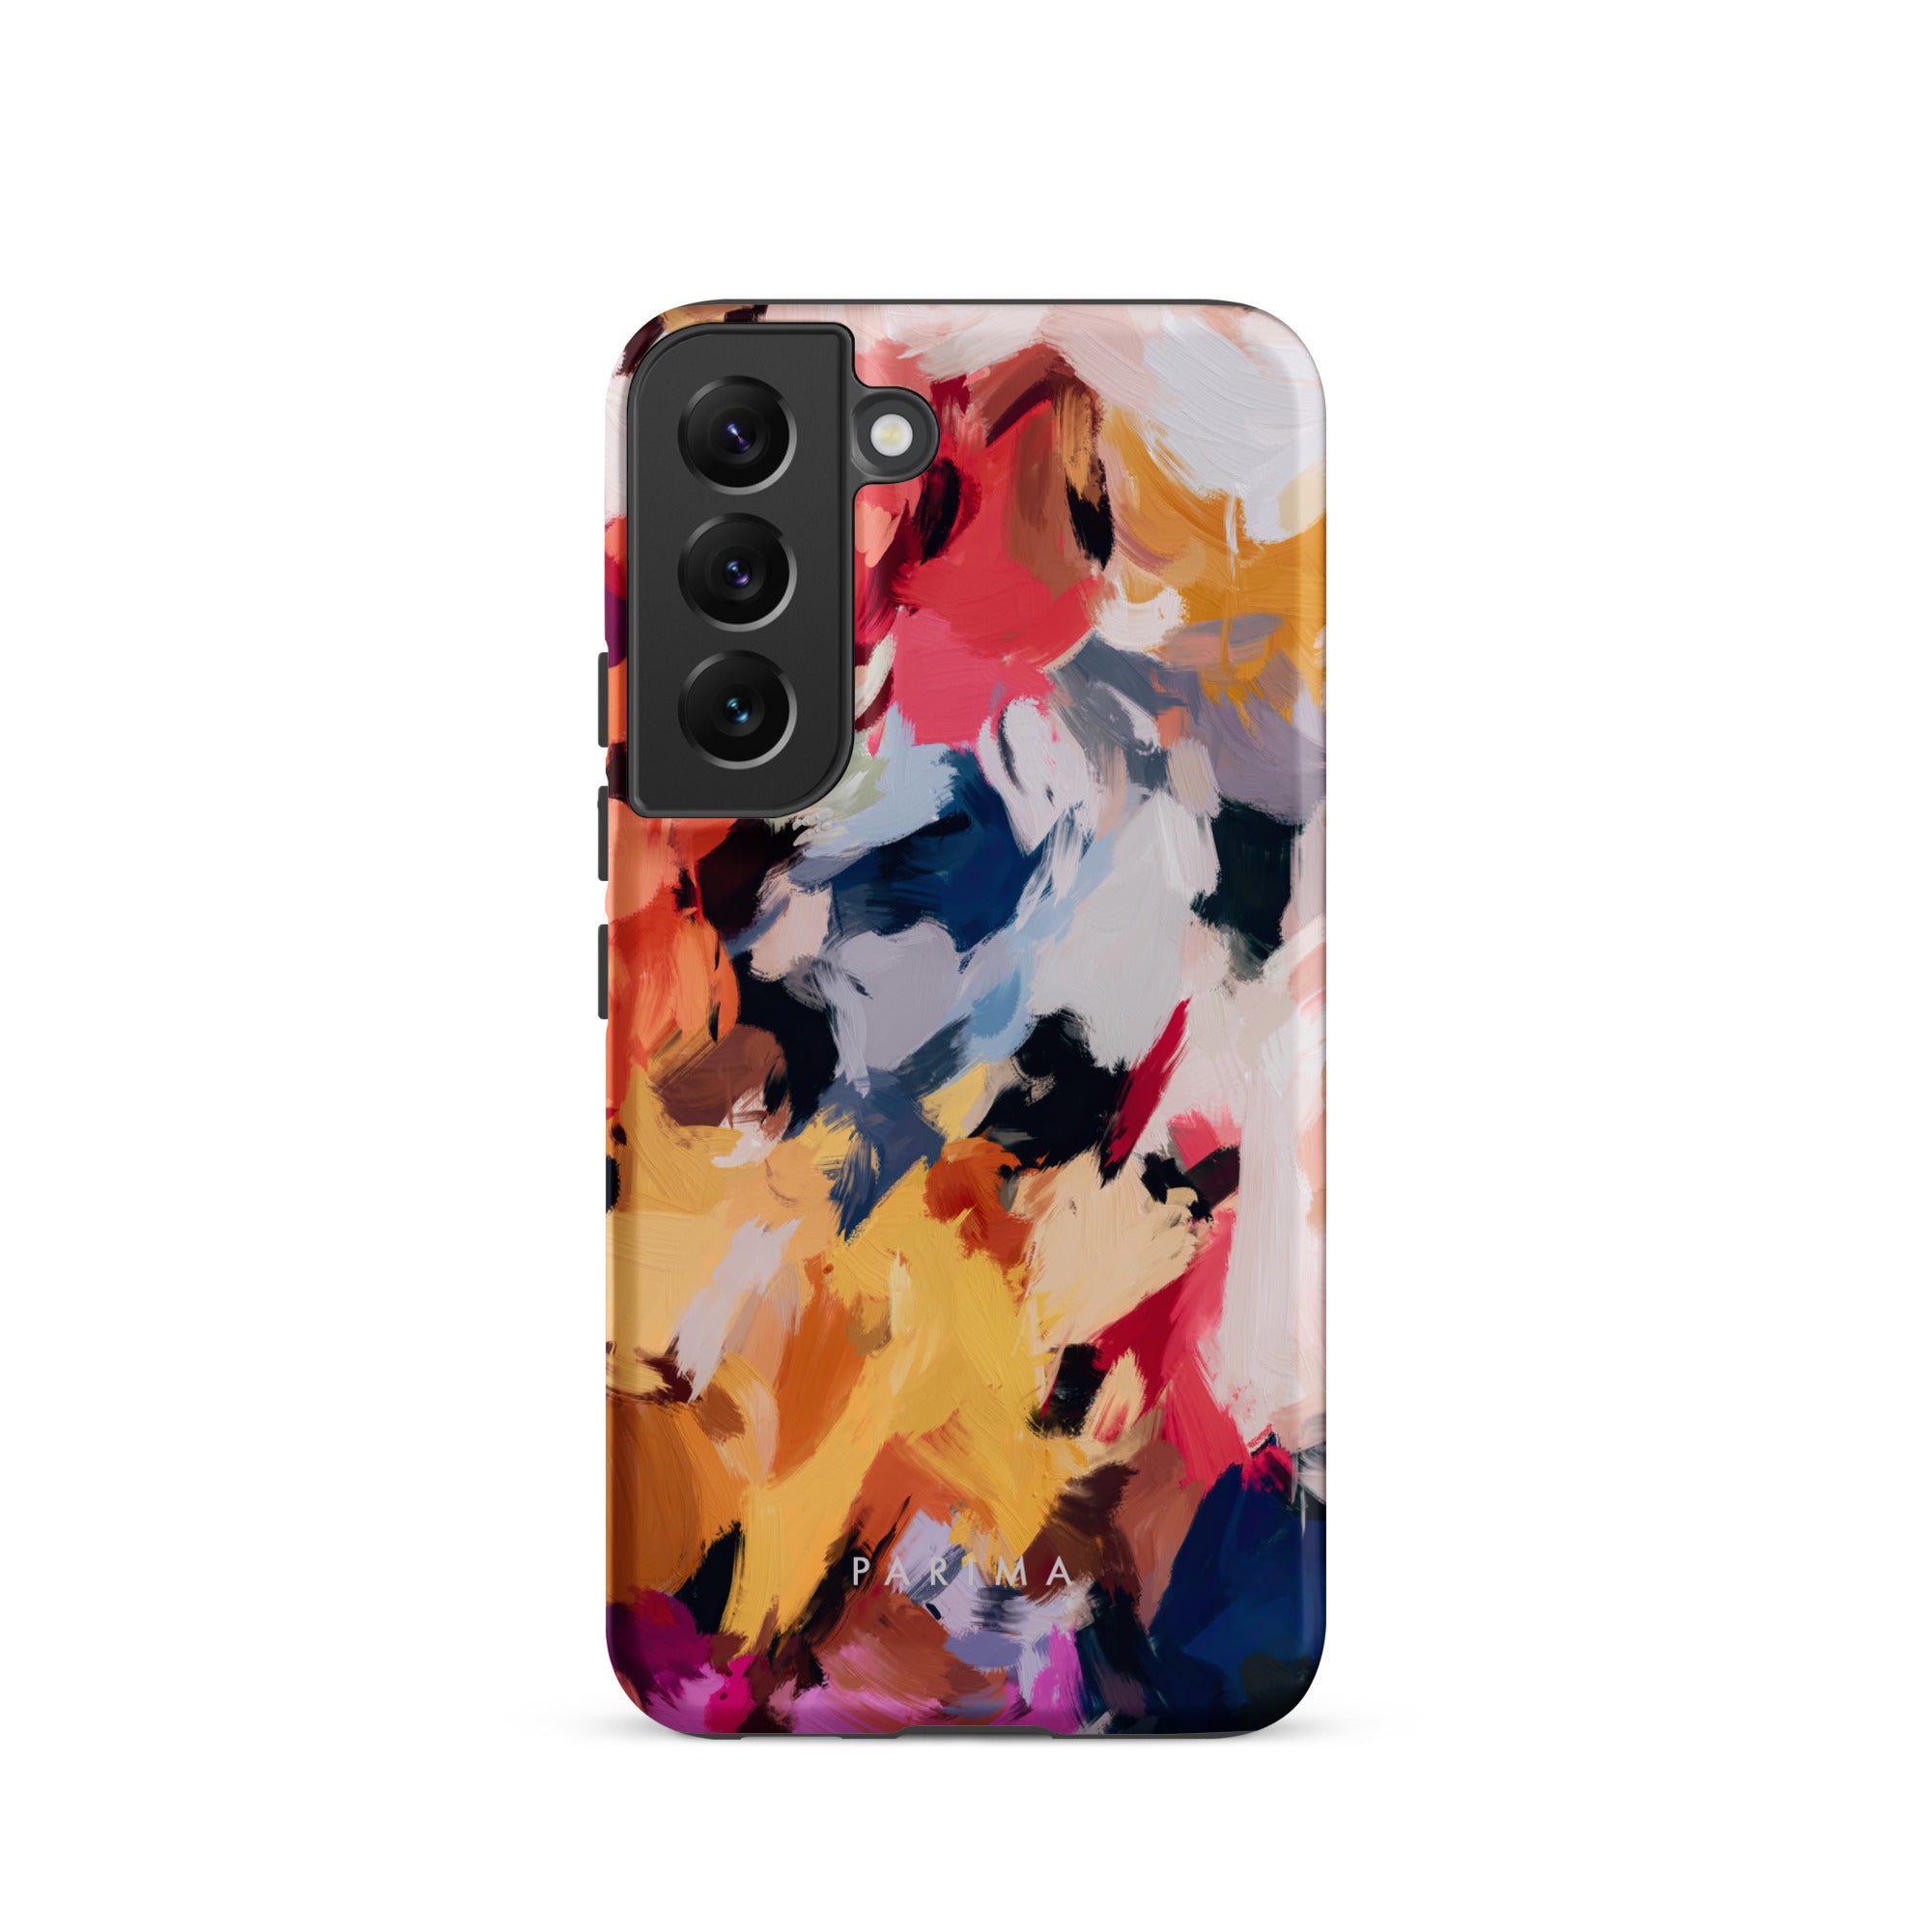 Wilde, blue and yellow multicolor abstract art on Samsung Galaxy S22 tough case by Parima Studio